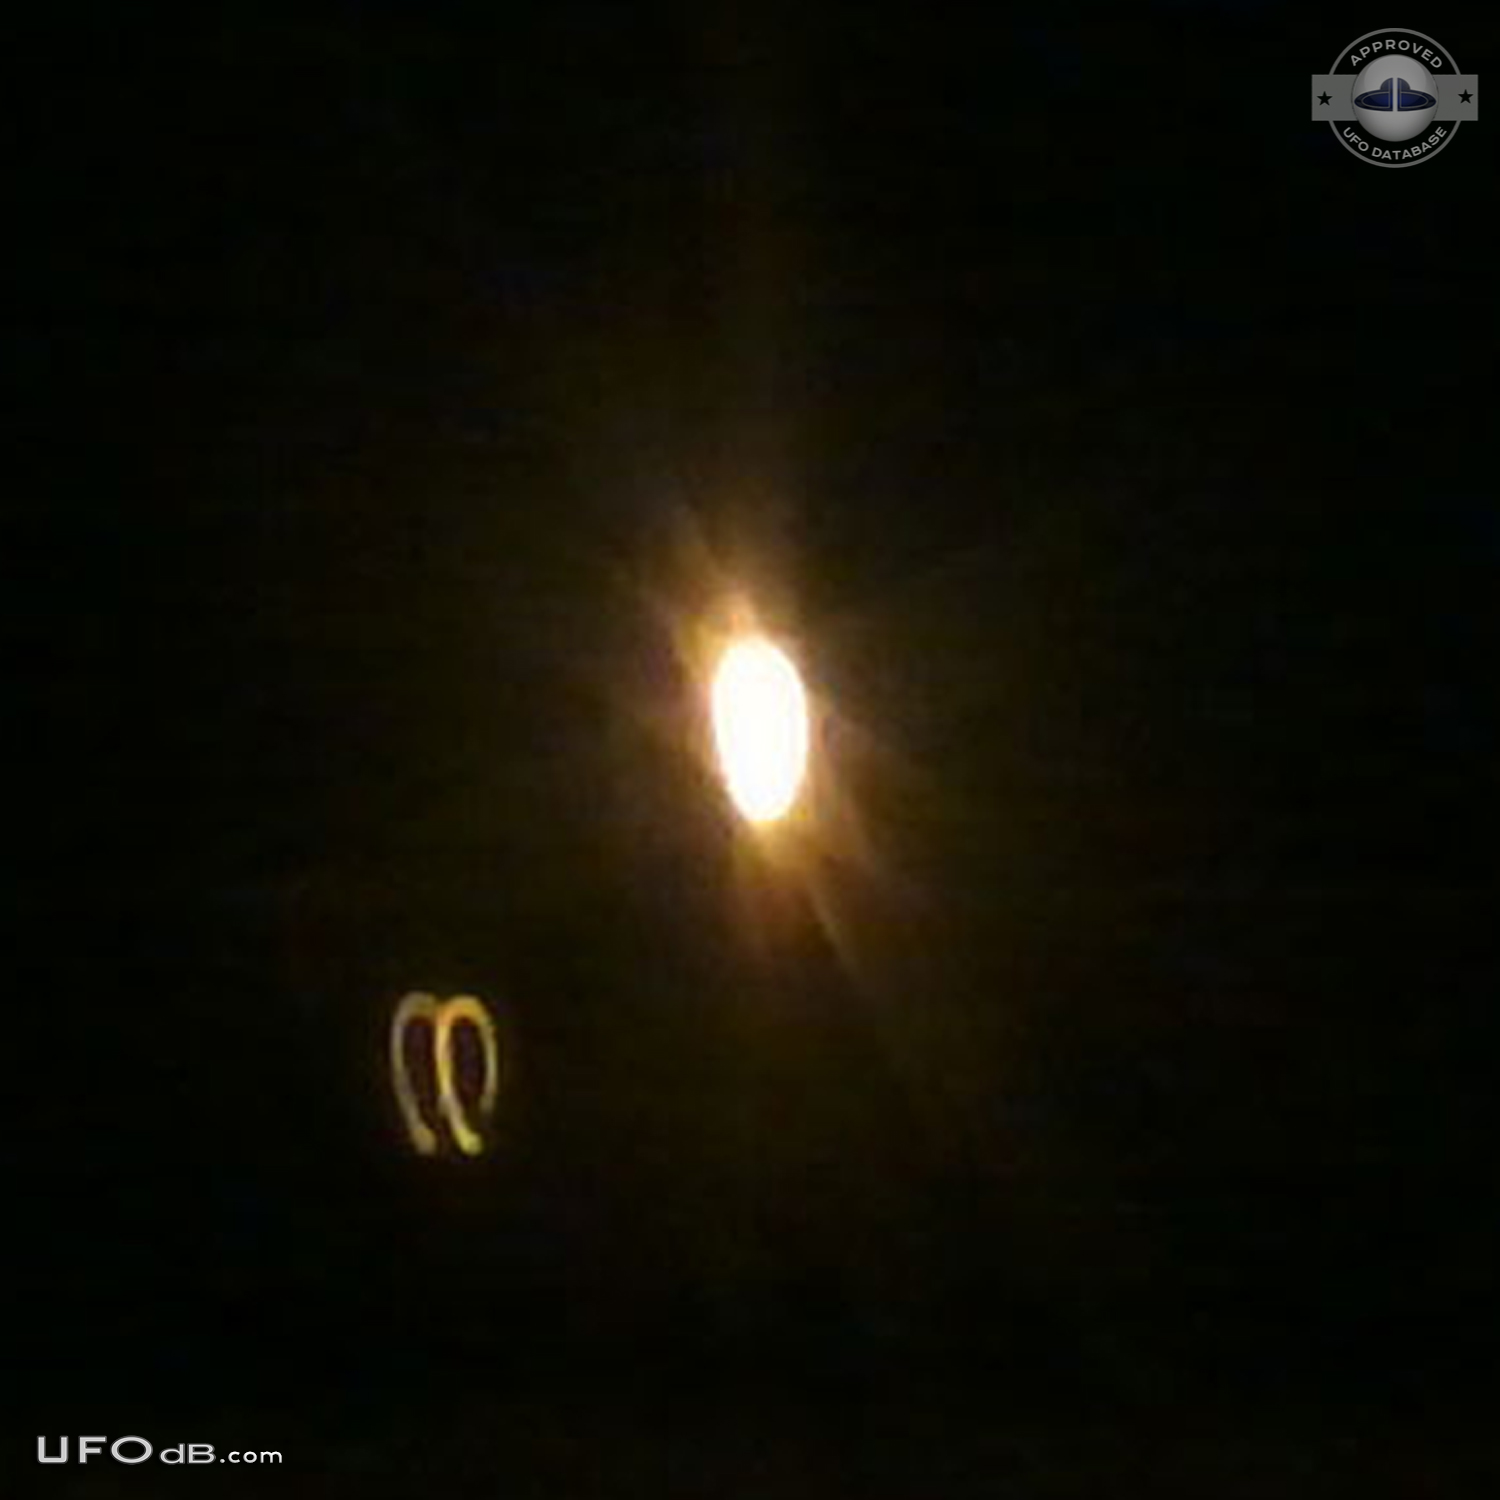 Two Jets follow UFO near Great Falls in Montana USA 2015 UFO Picture #644-3